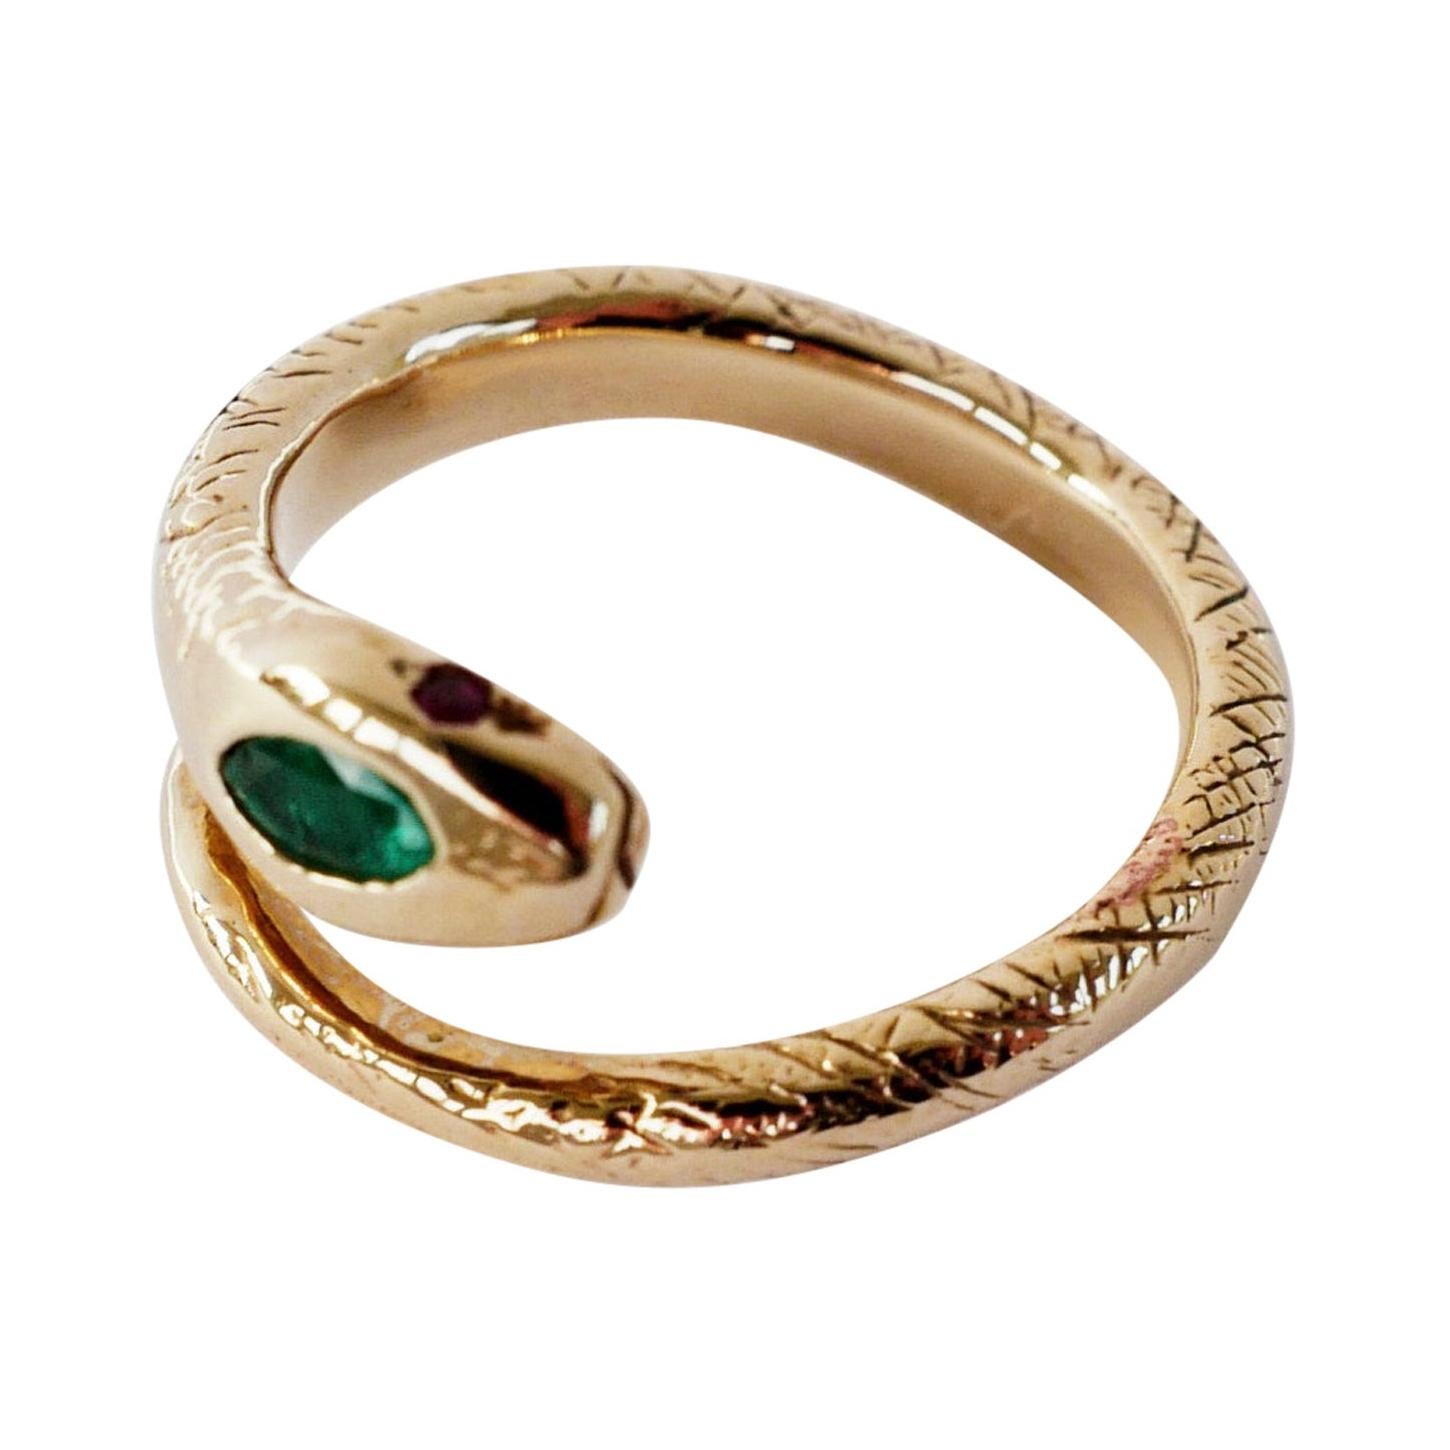 Emerald Snake Ring Ruby Victorian Style Cocktail Bronze Adjustable J Dauphin